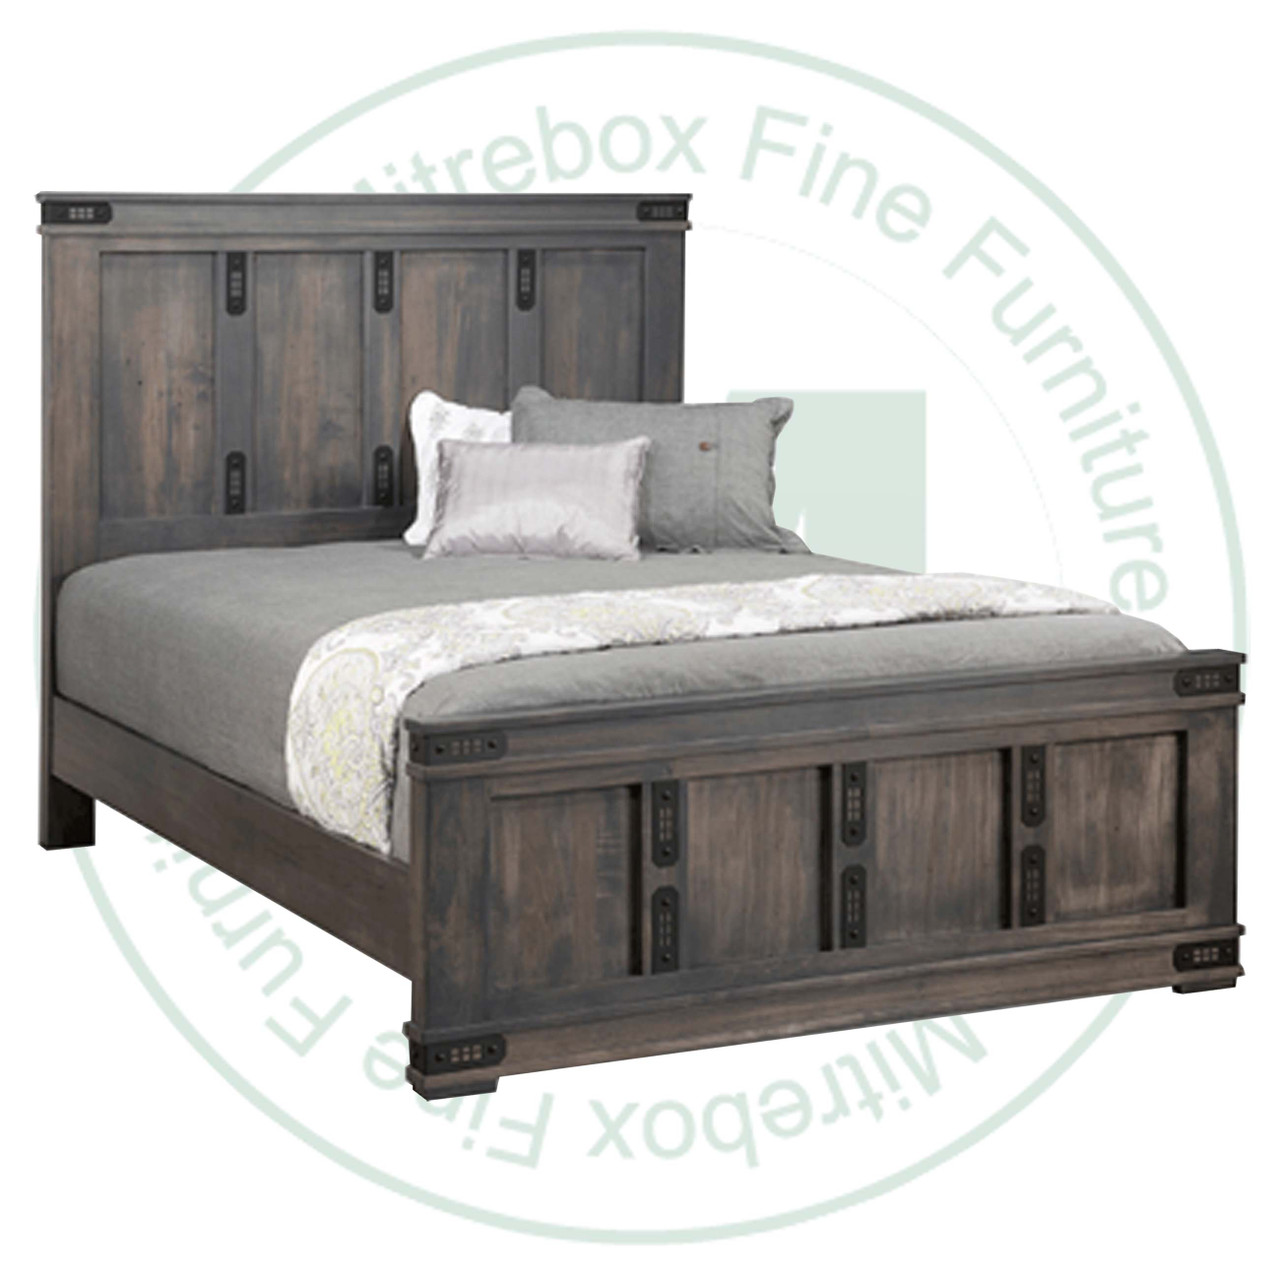 Maple Gastown King Bed Complete With Low Footboard Headboard 58'' Footboard 24''